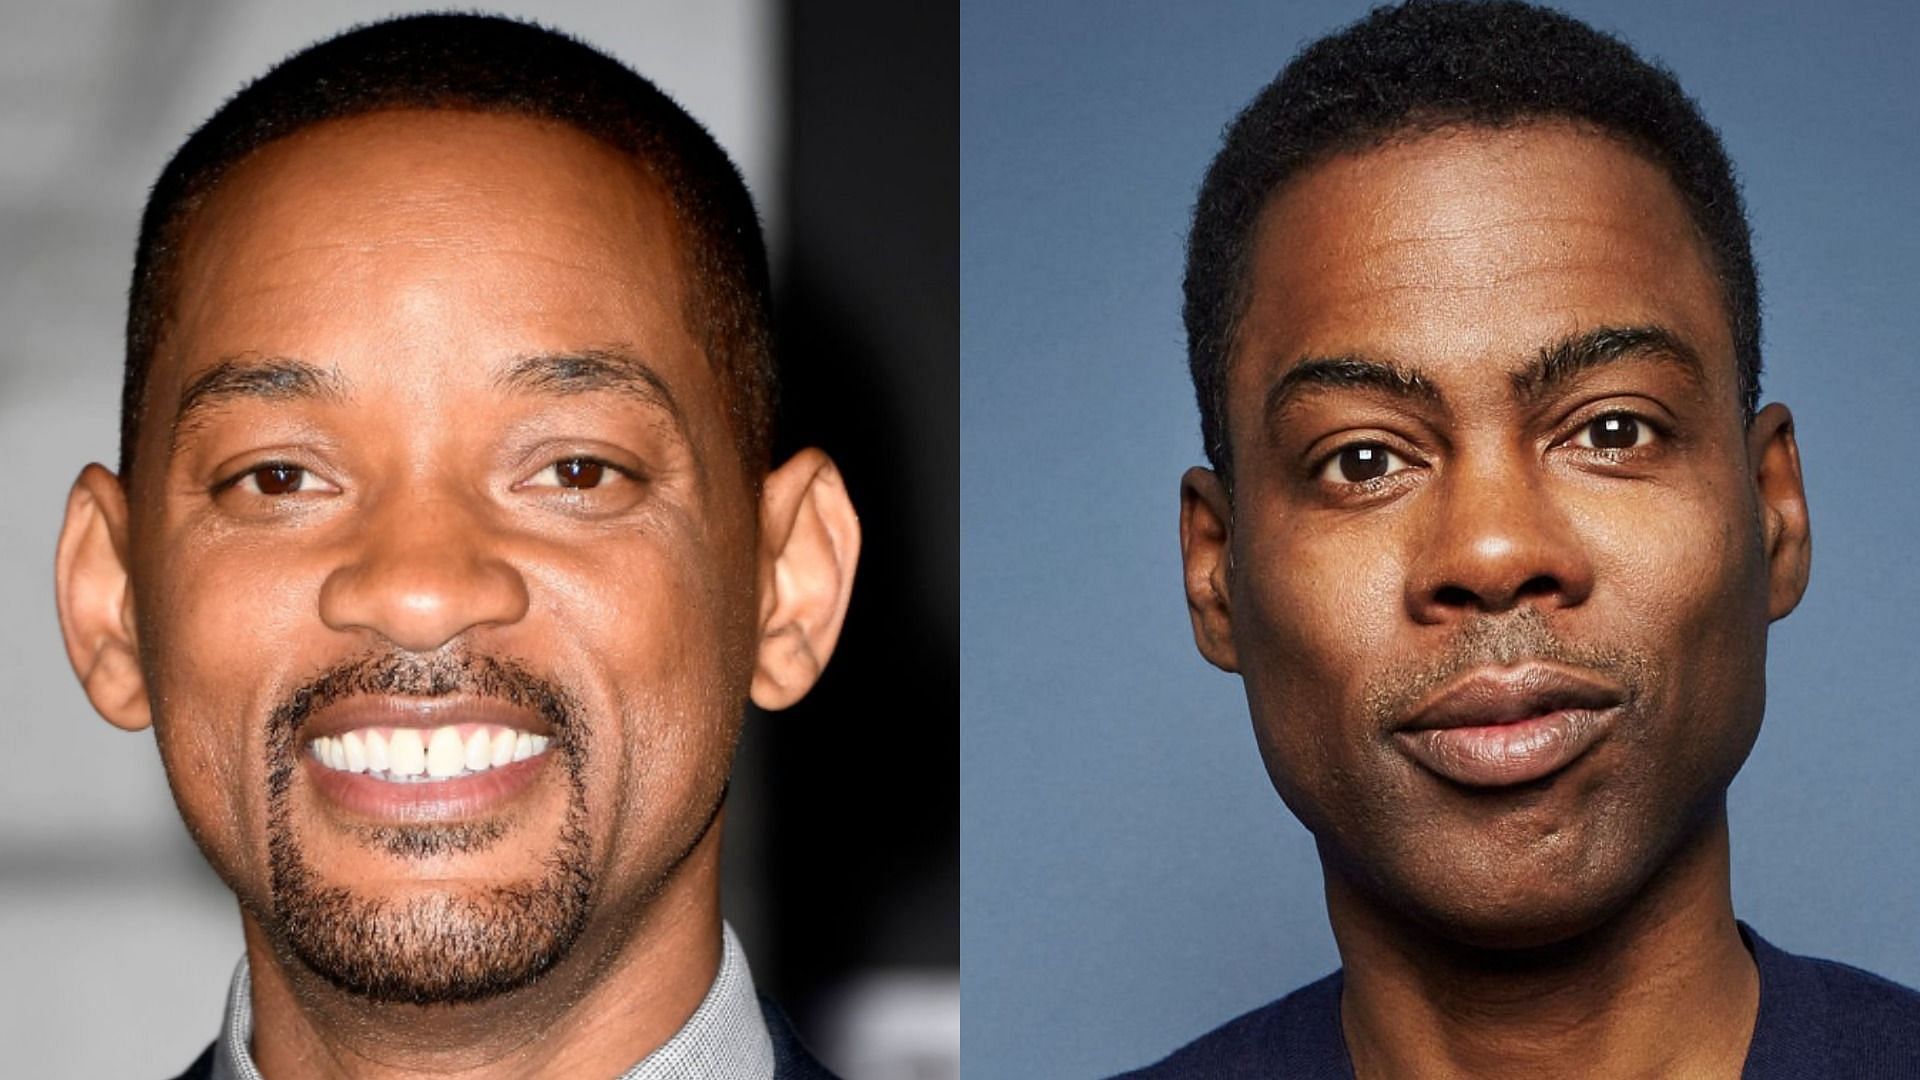 Chris Rock and Will Smith&#039;s slapping incident at Oscars 2022 have taken the entertainment industry by storm (Image via Frazer Harrison/Getty Images and Mike McGregor/Getty Images)